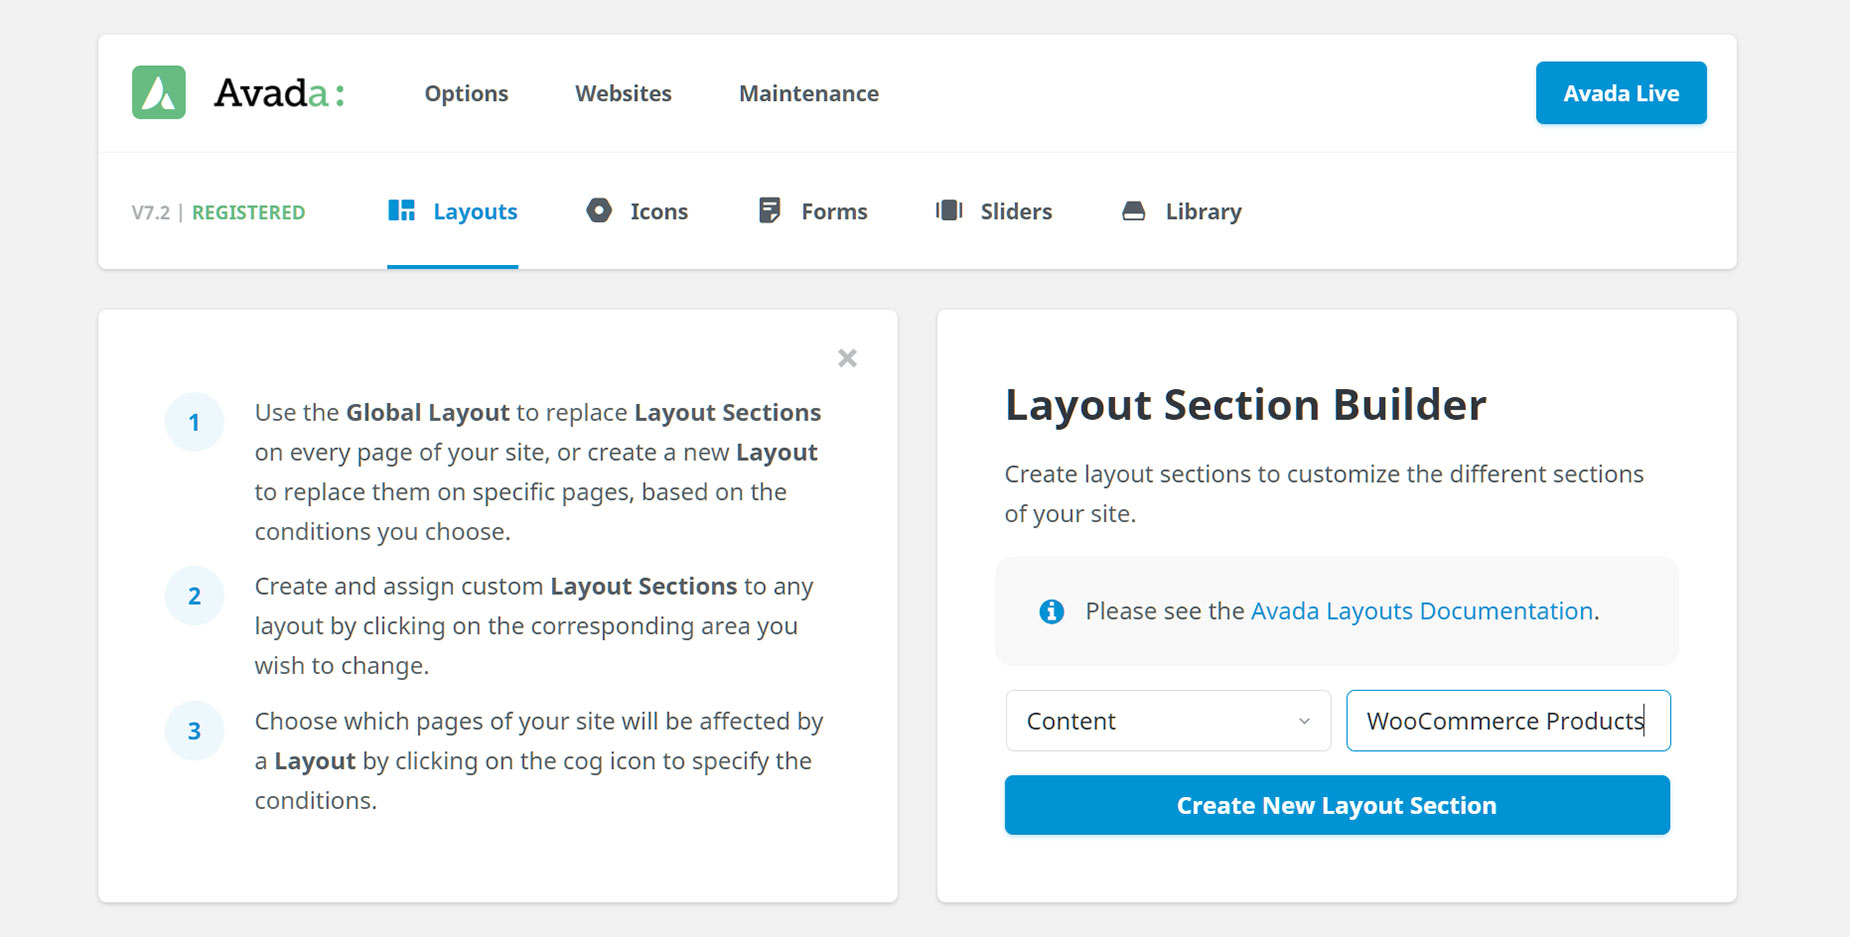 Layouts > Layout Section Builder